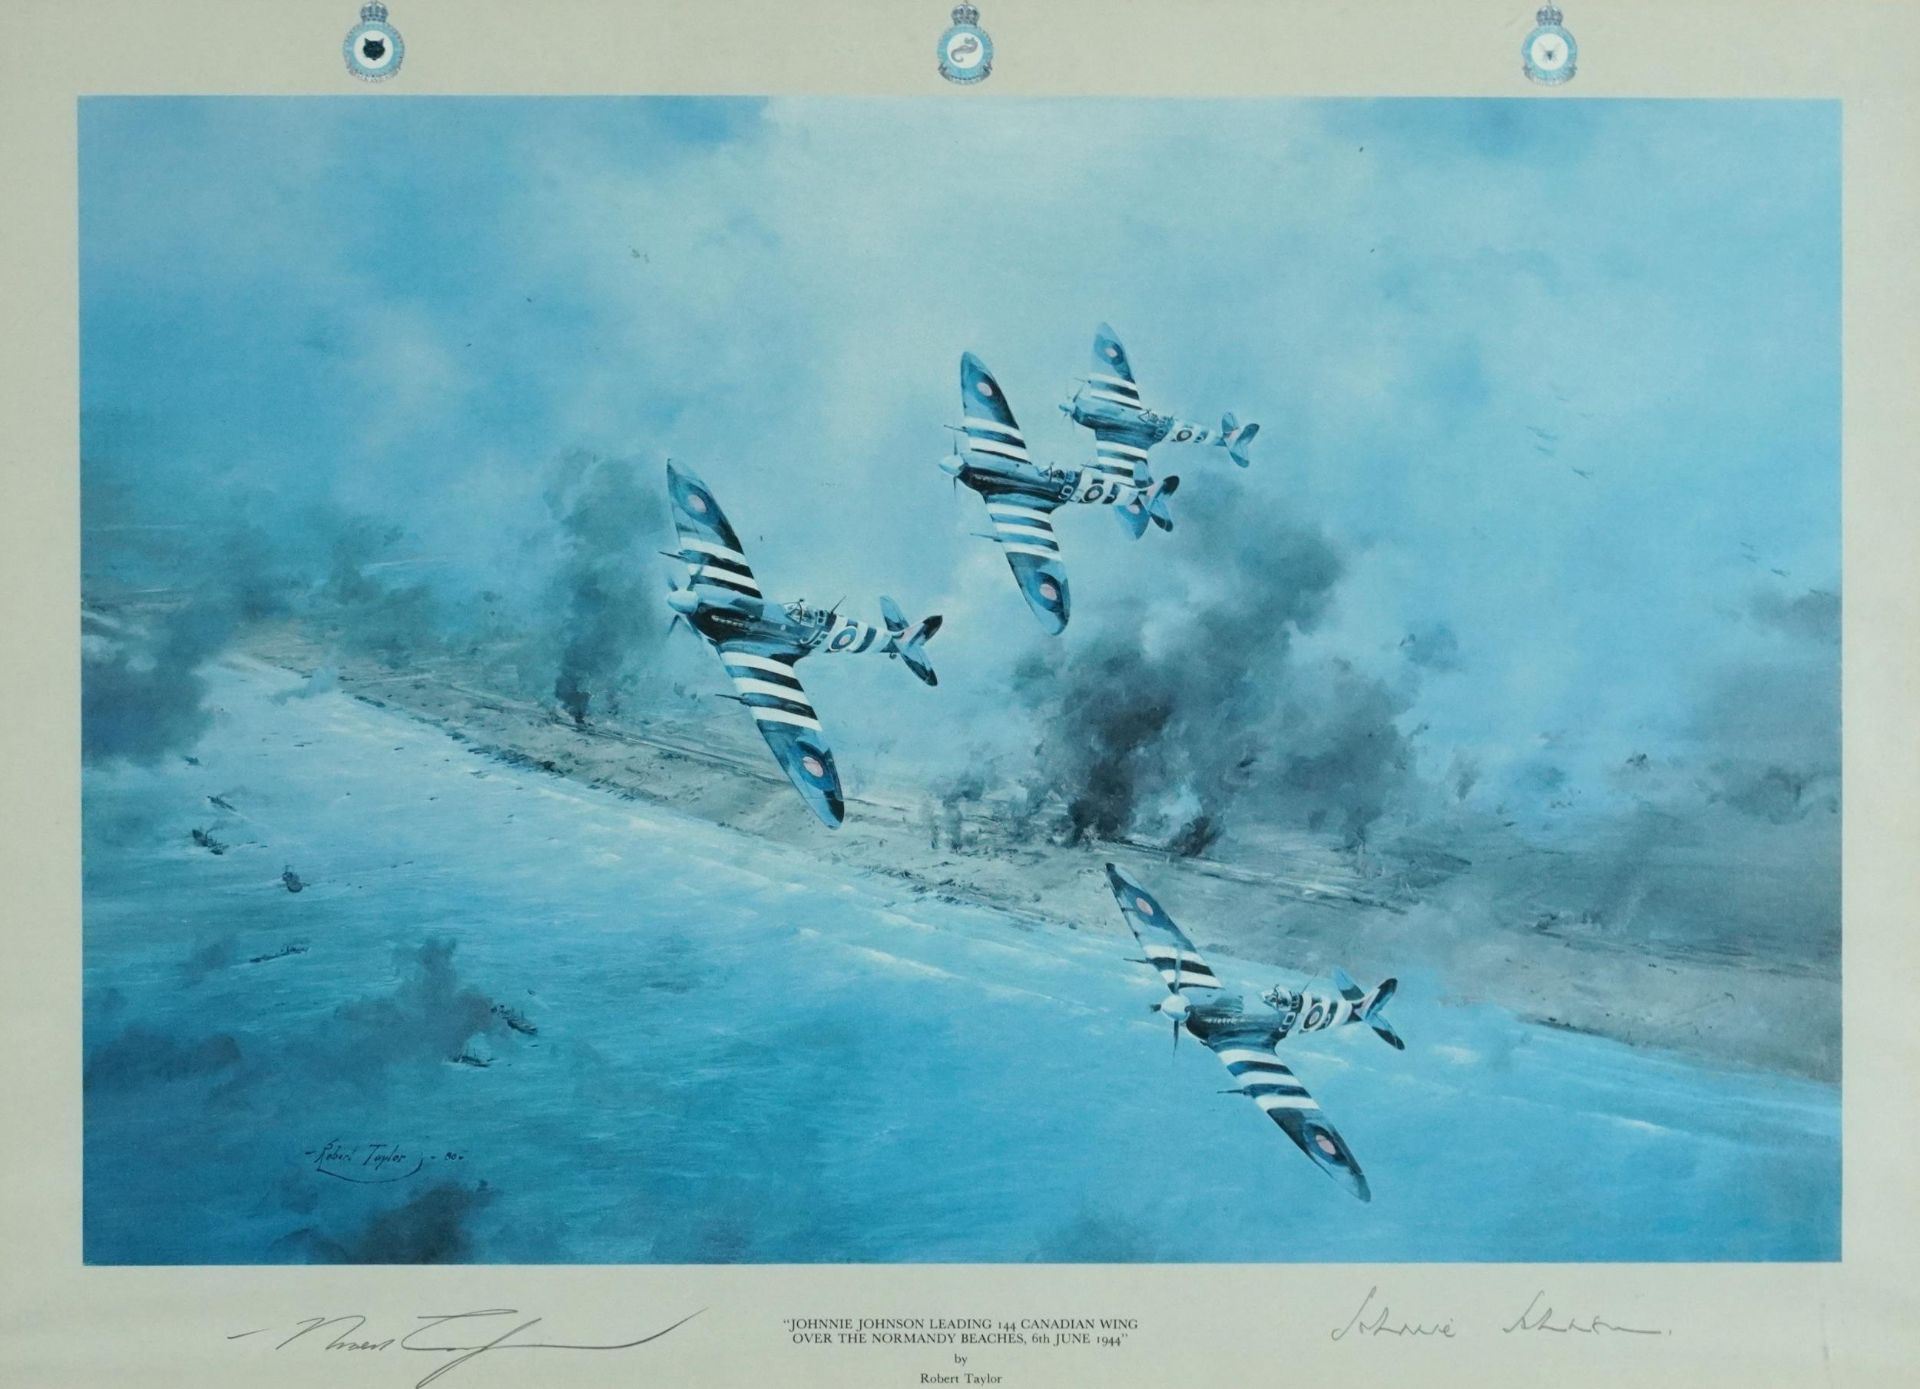 Robert Taylor - Johnny Johnson leading 144 Canadian Wing over the Normandy Beaches, military